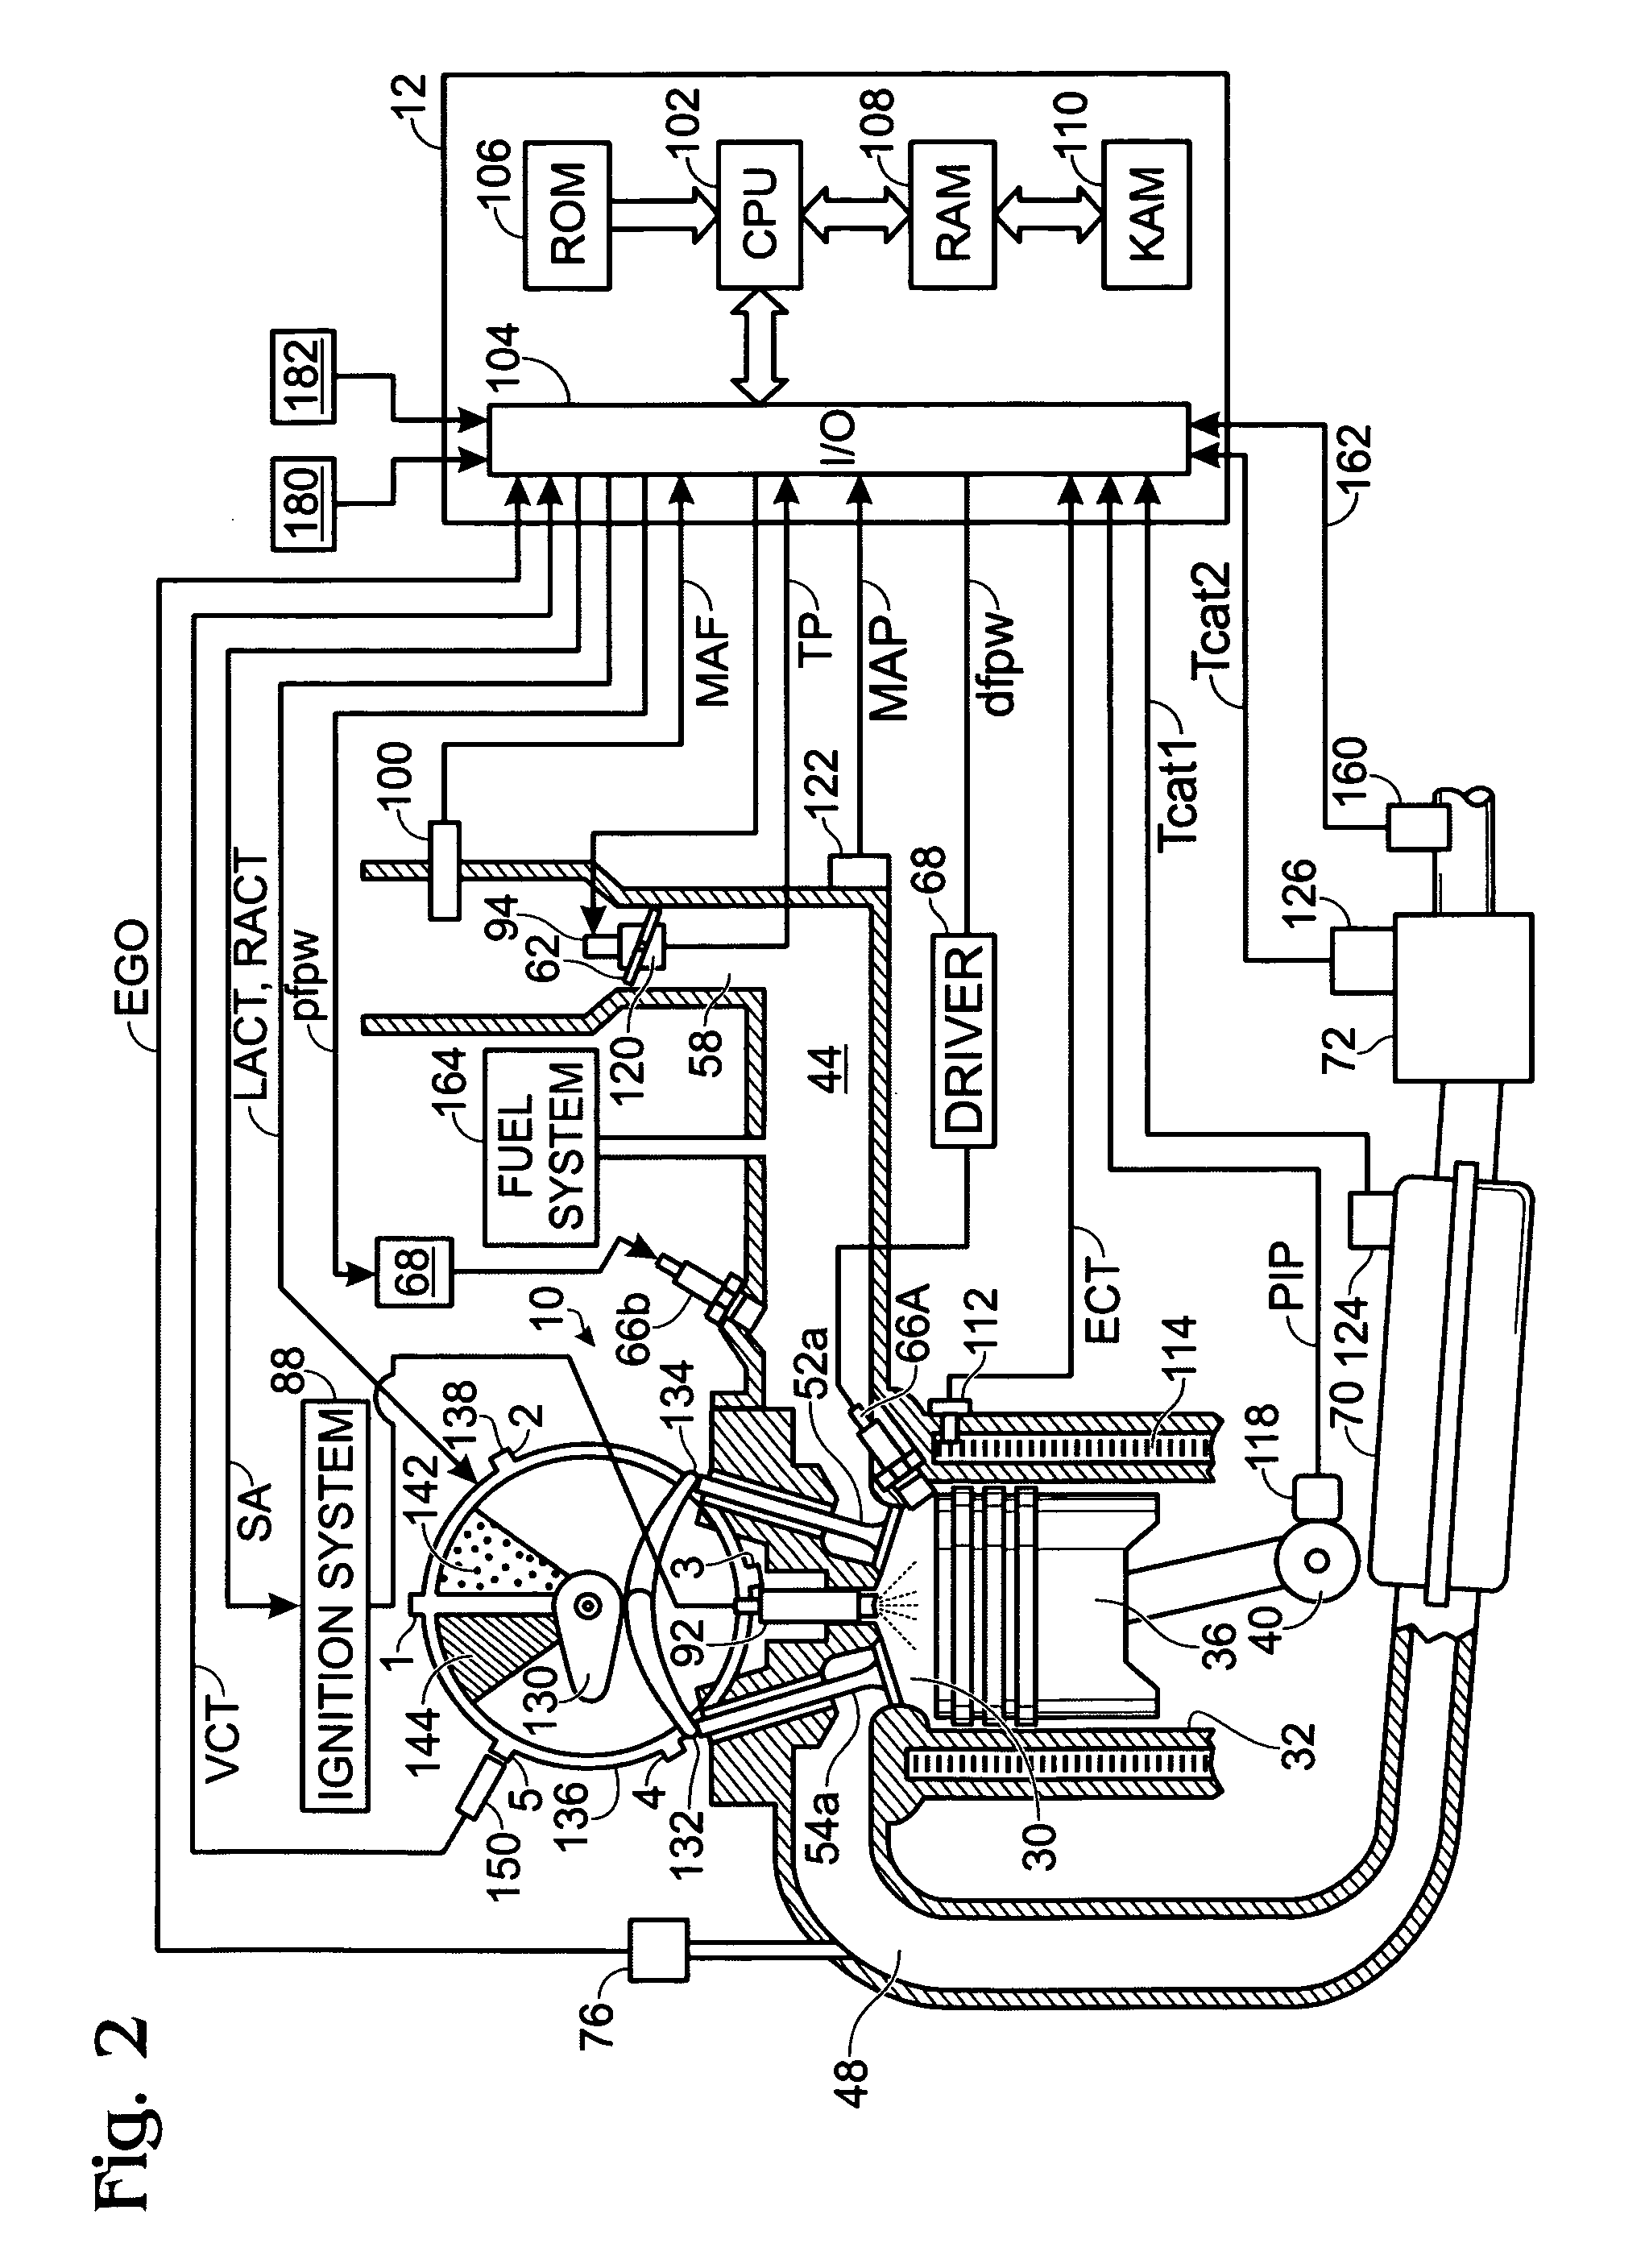 Engine output control system and method